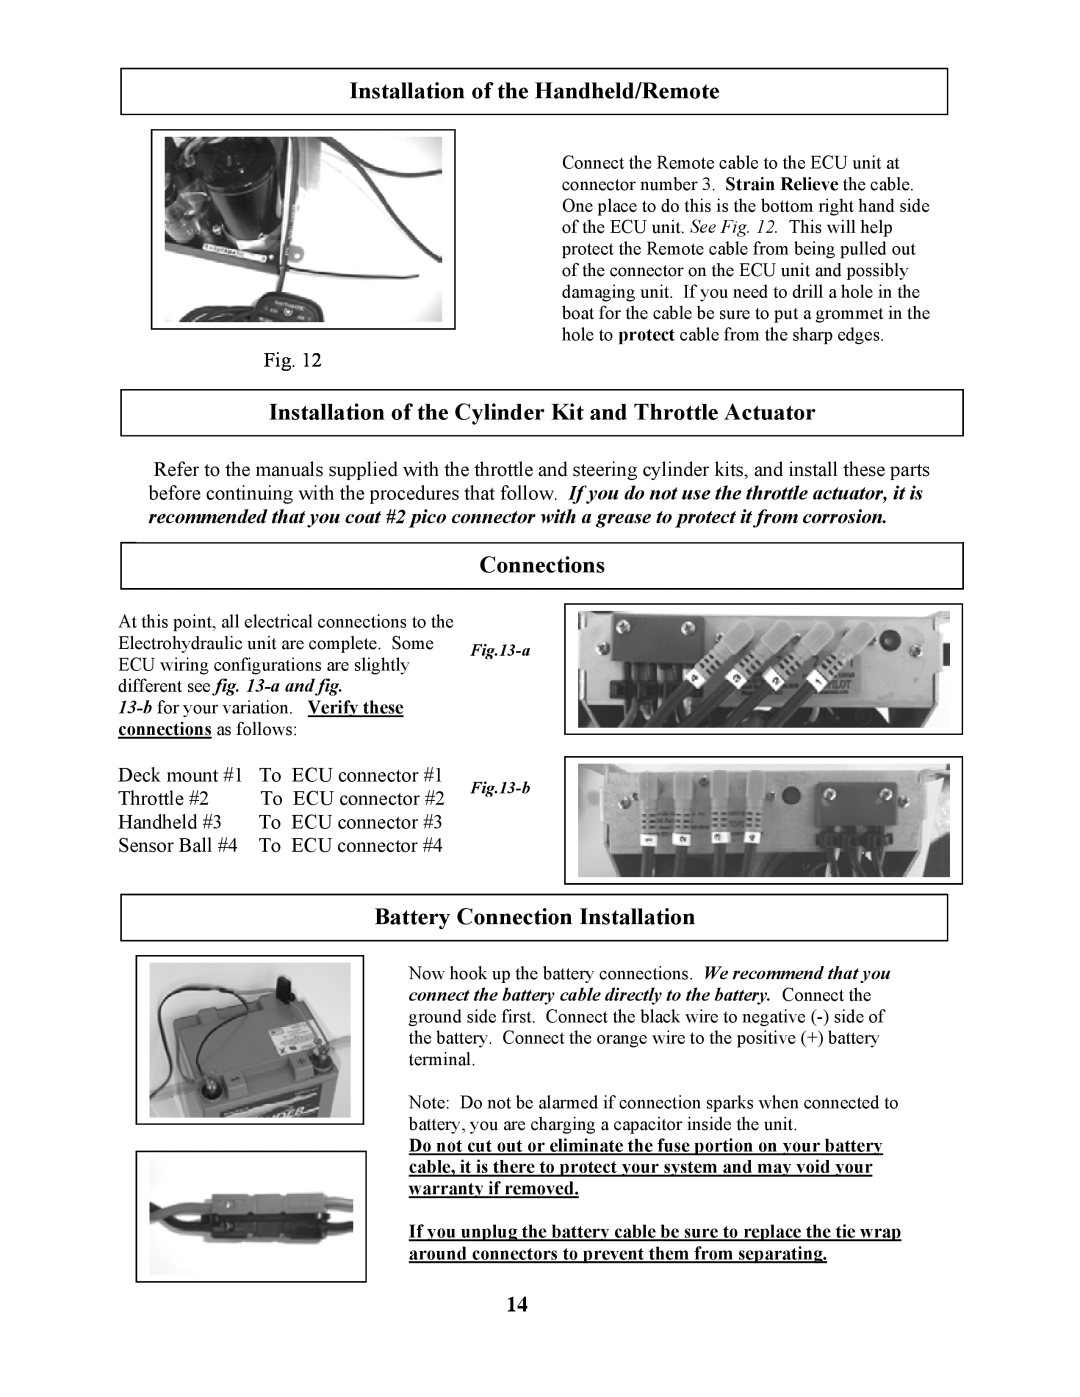 Garmin 906-2000-00 owner manual Installation of the Handheld/Remote, Installation of the Cylinder Kit and Throttle Actuator 